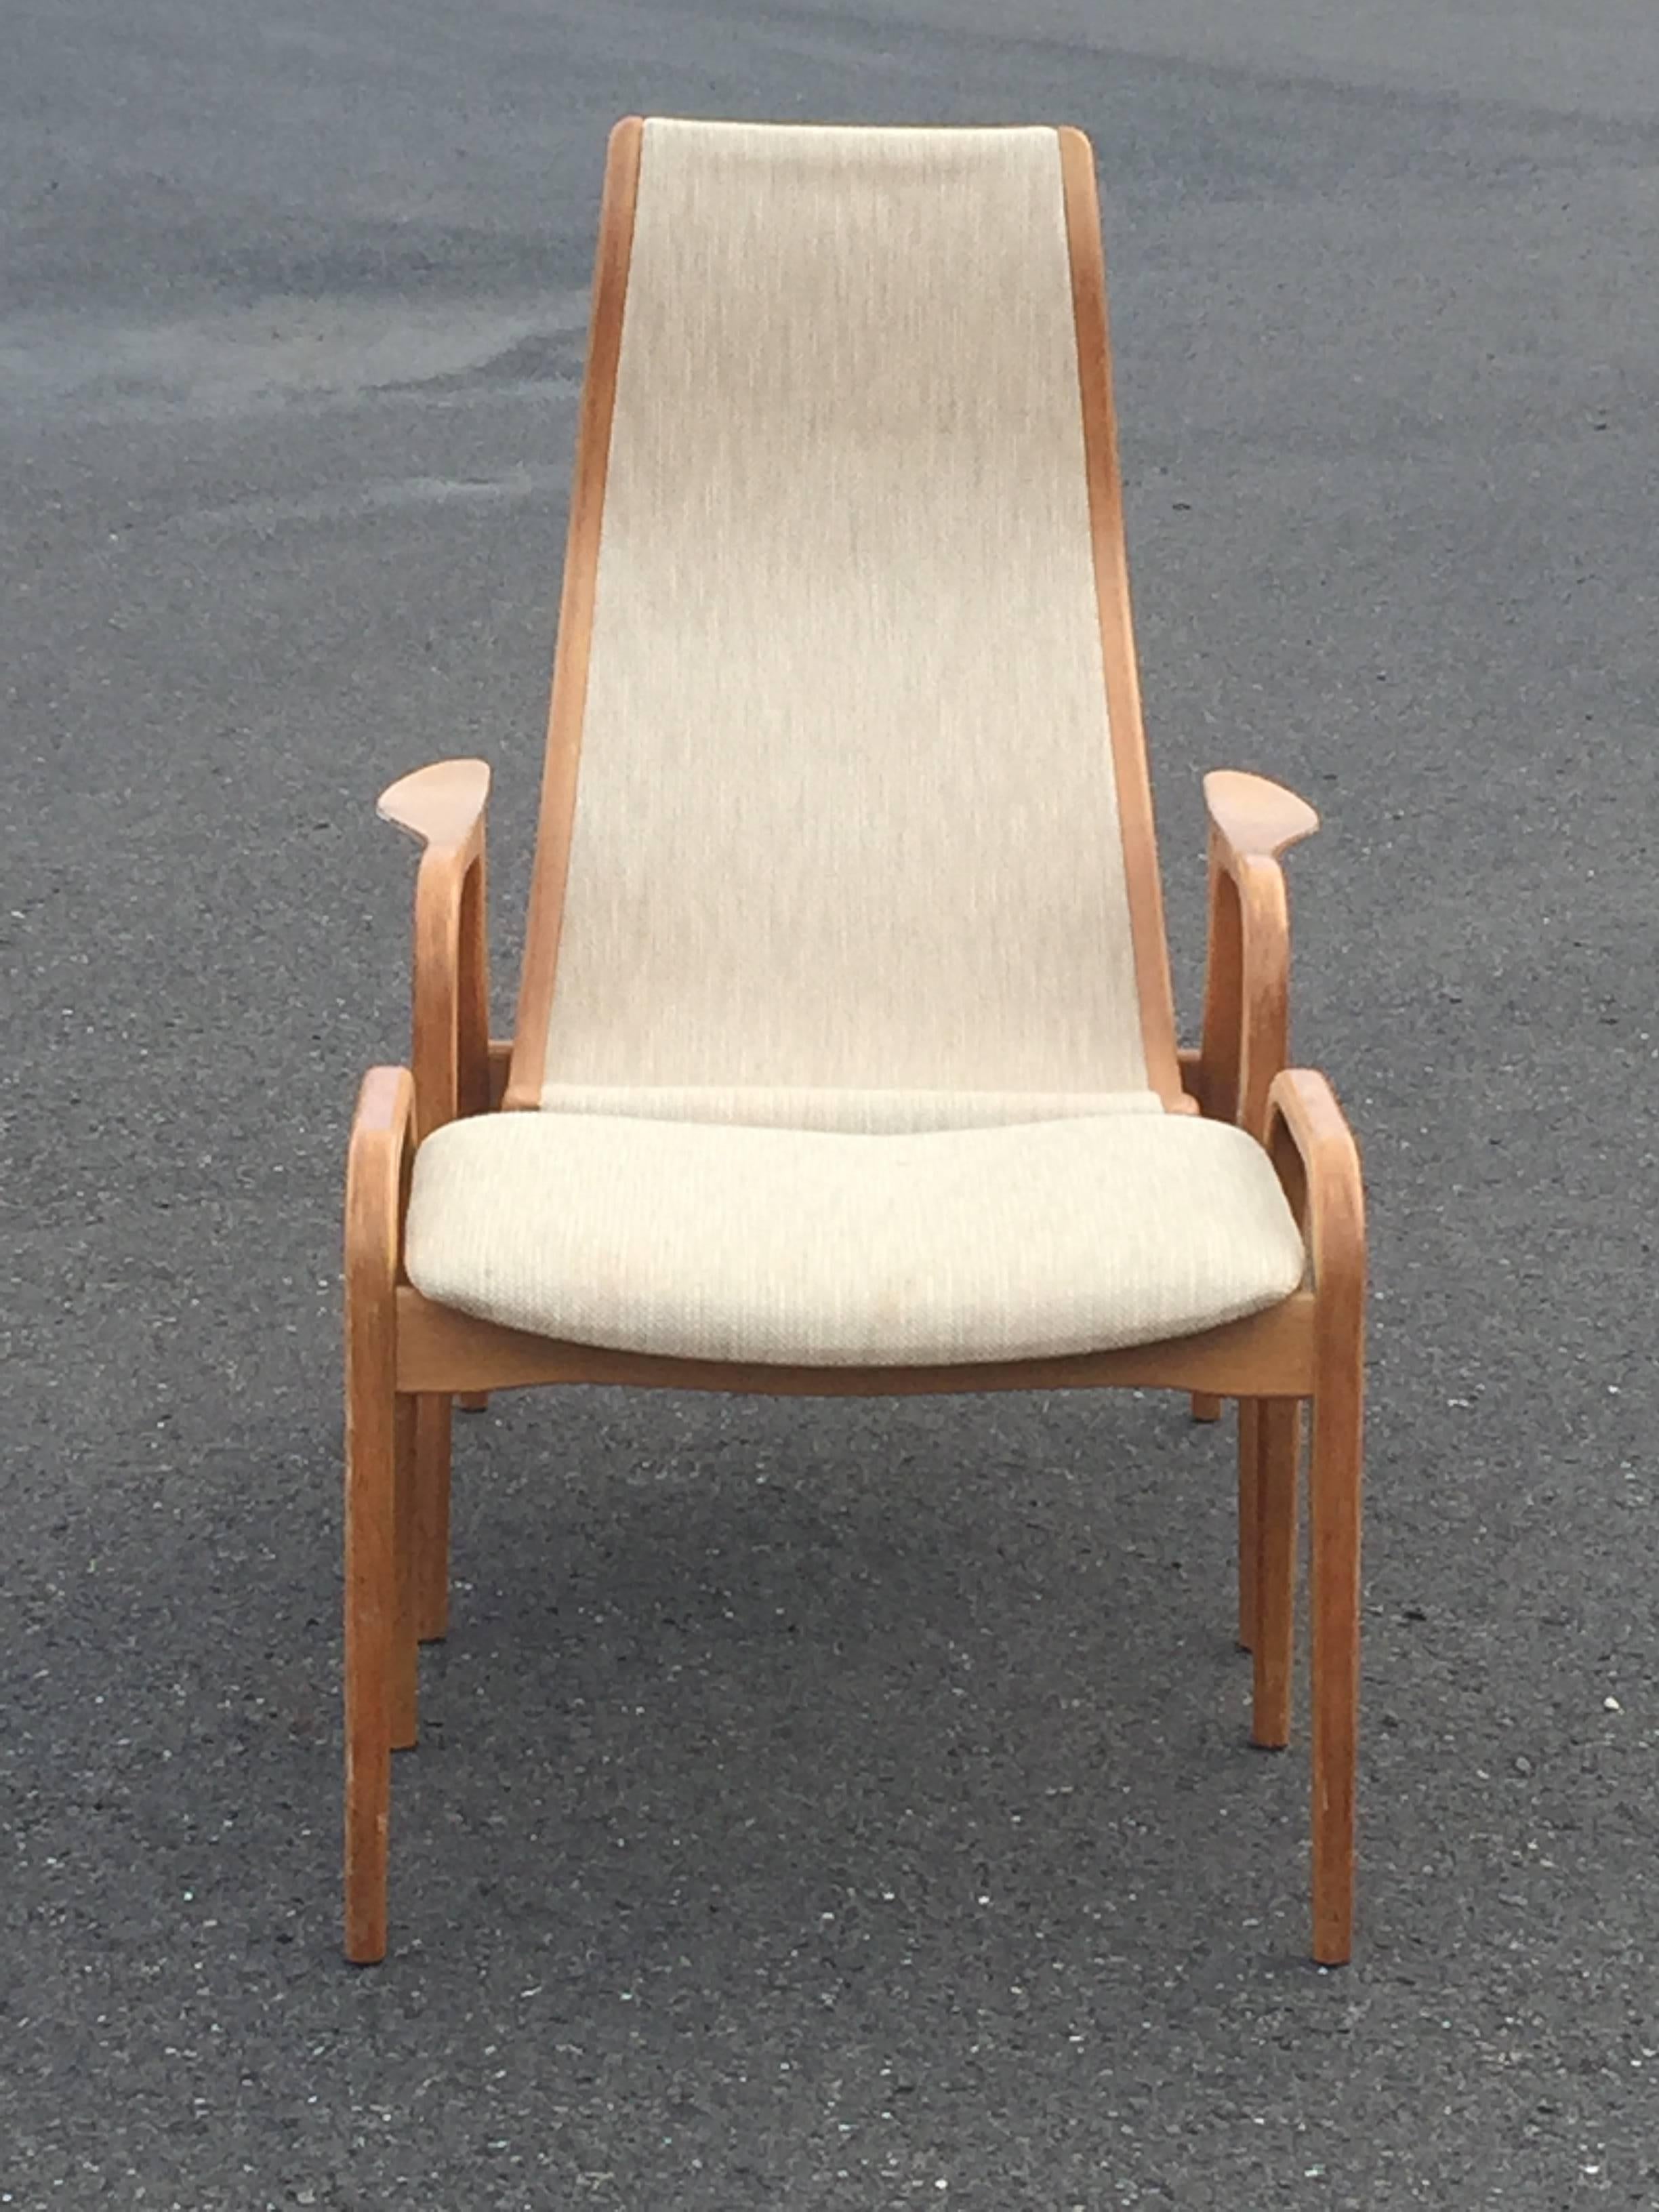 Lamino lounge chair and ottoman designed by Yngve Ekstrom, Sweden, circa 1950s. Lovely white oak frames with neutral cream tweedy upholstery. 
Ottoman 23 3/8 W, 17 D, 16 H.